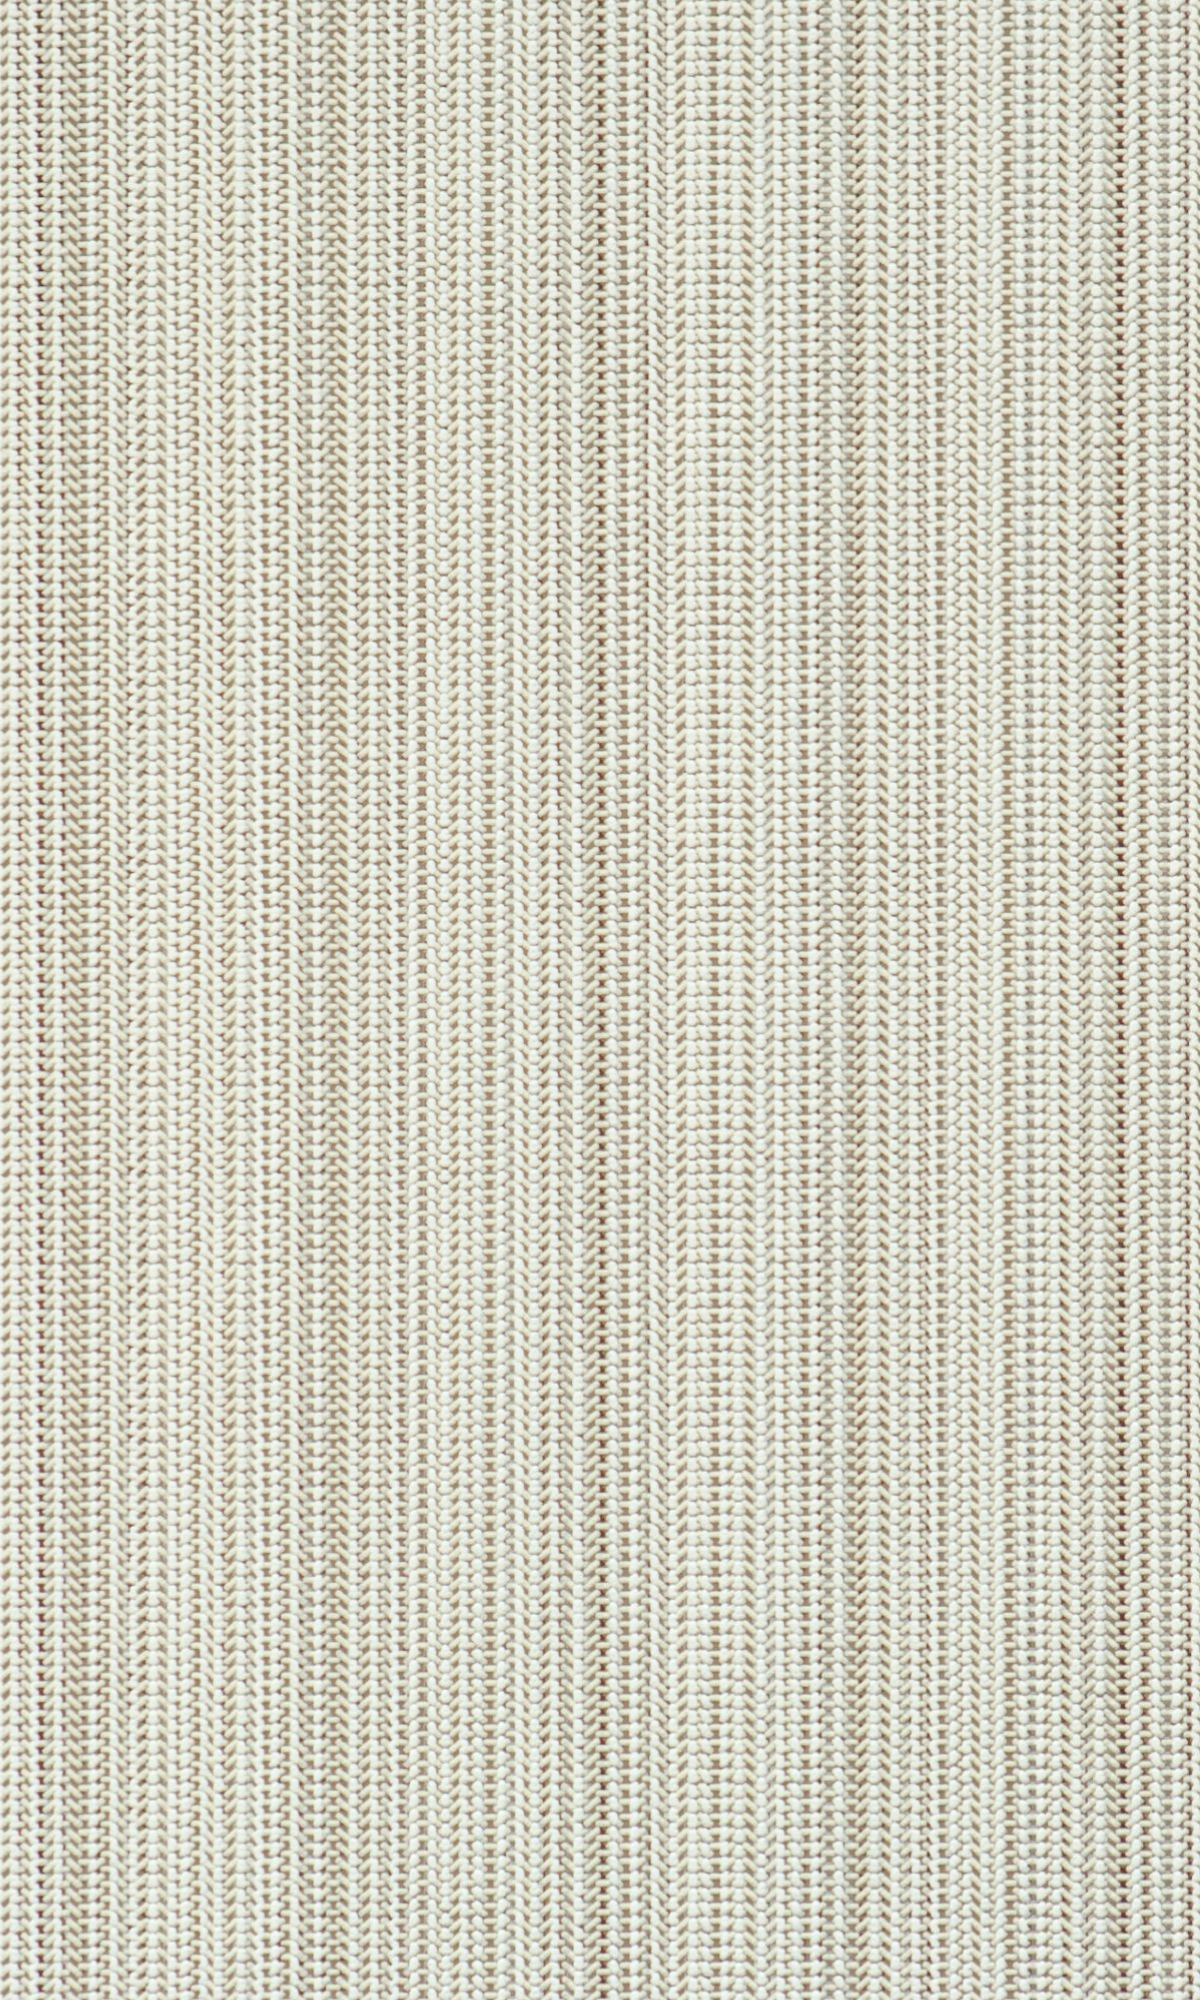 Beige and Brown Geometric Impulse and Stripe Wallpaper R1896